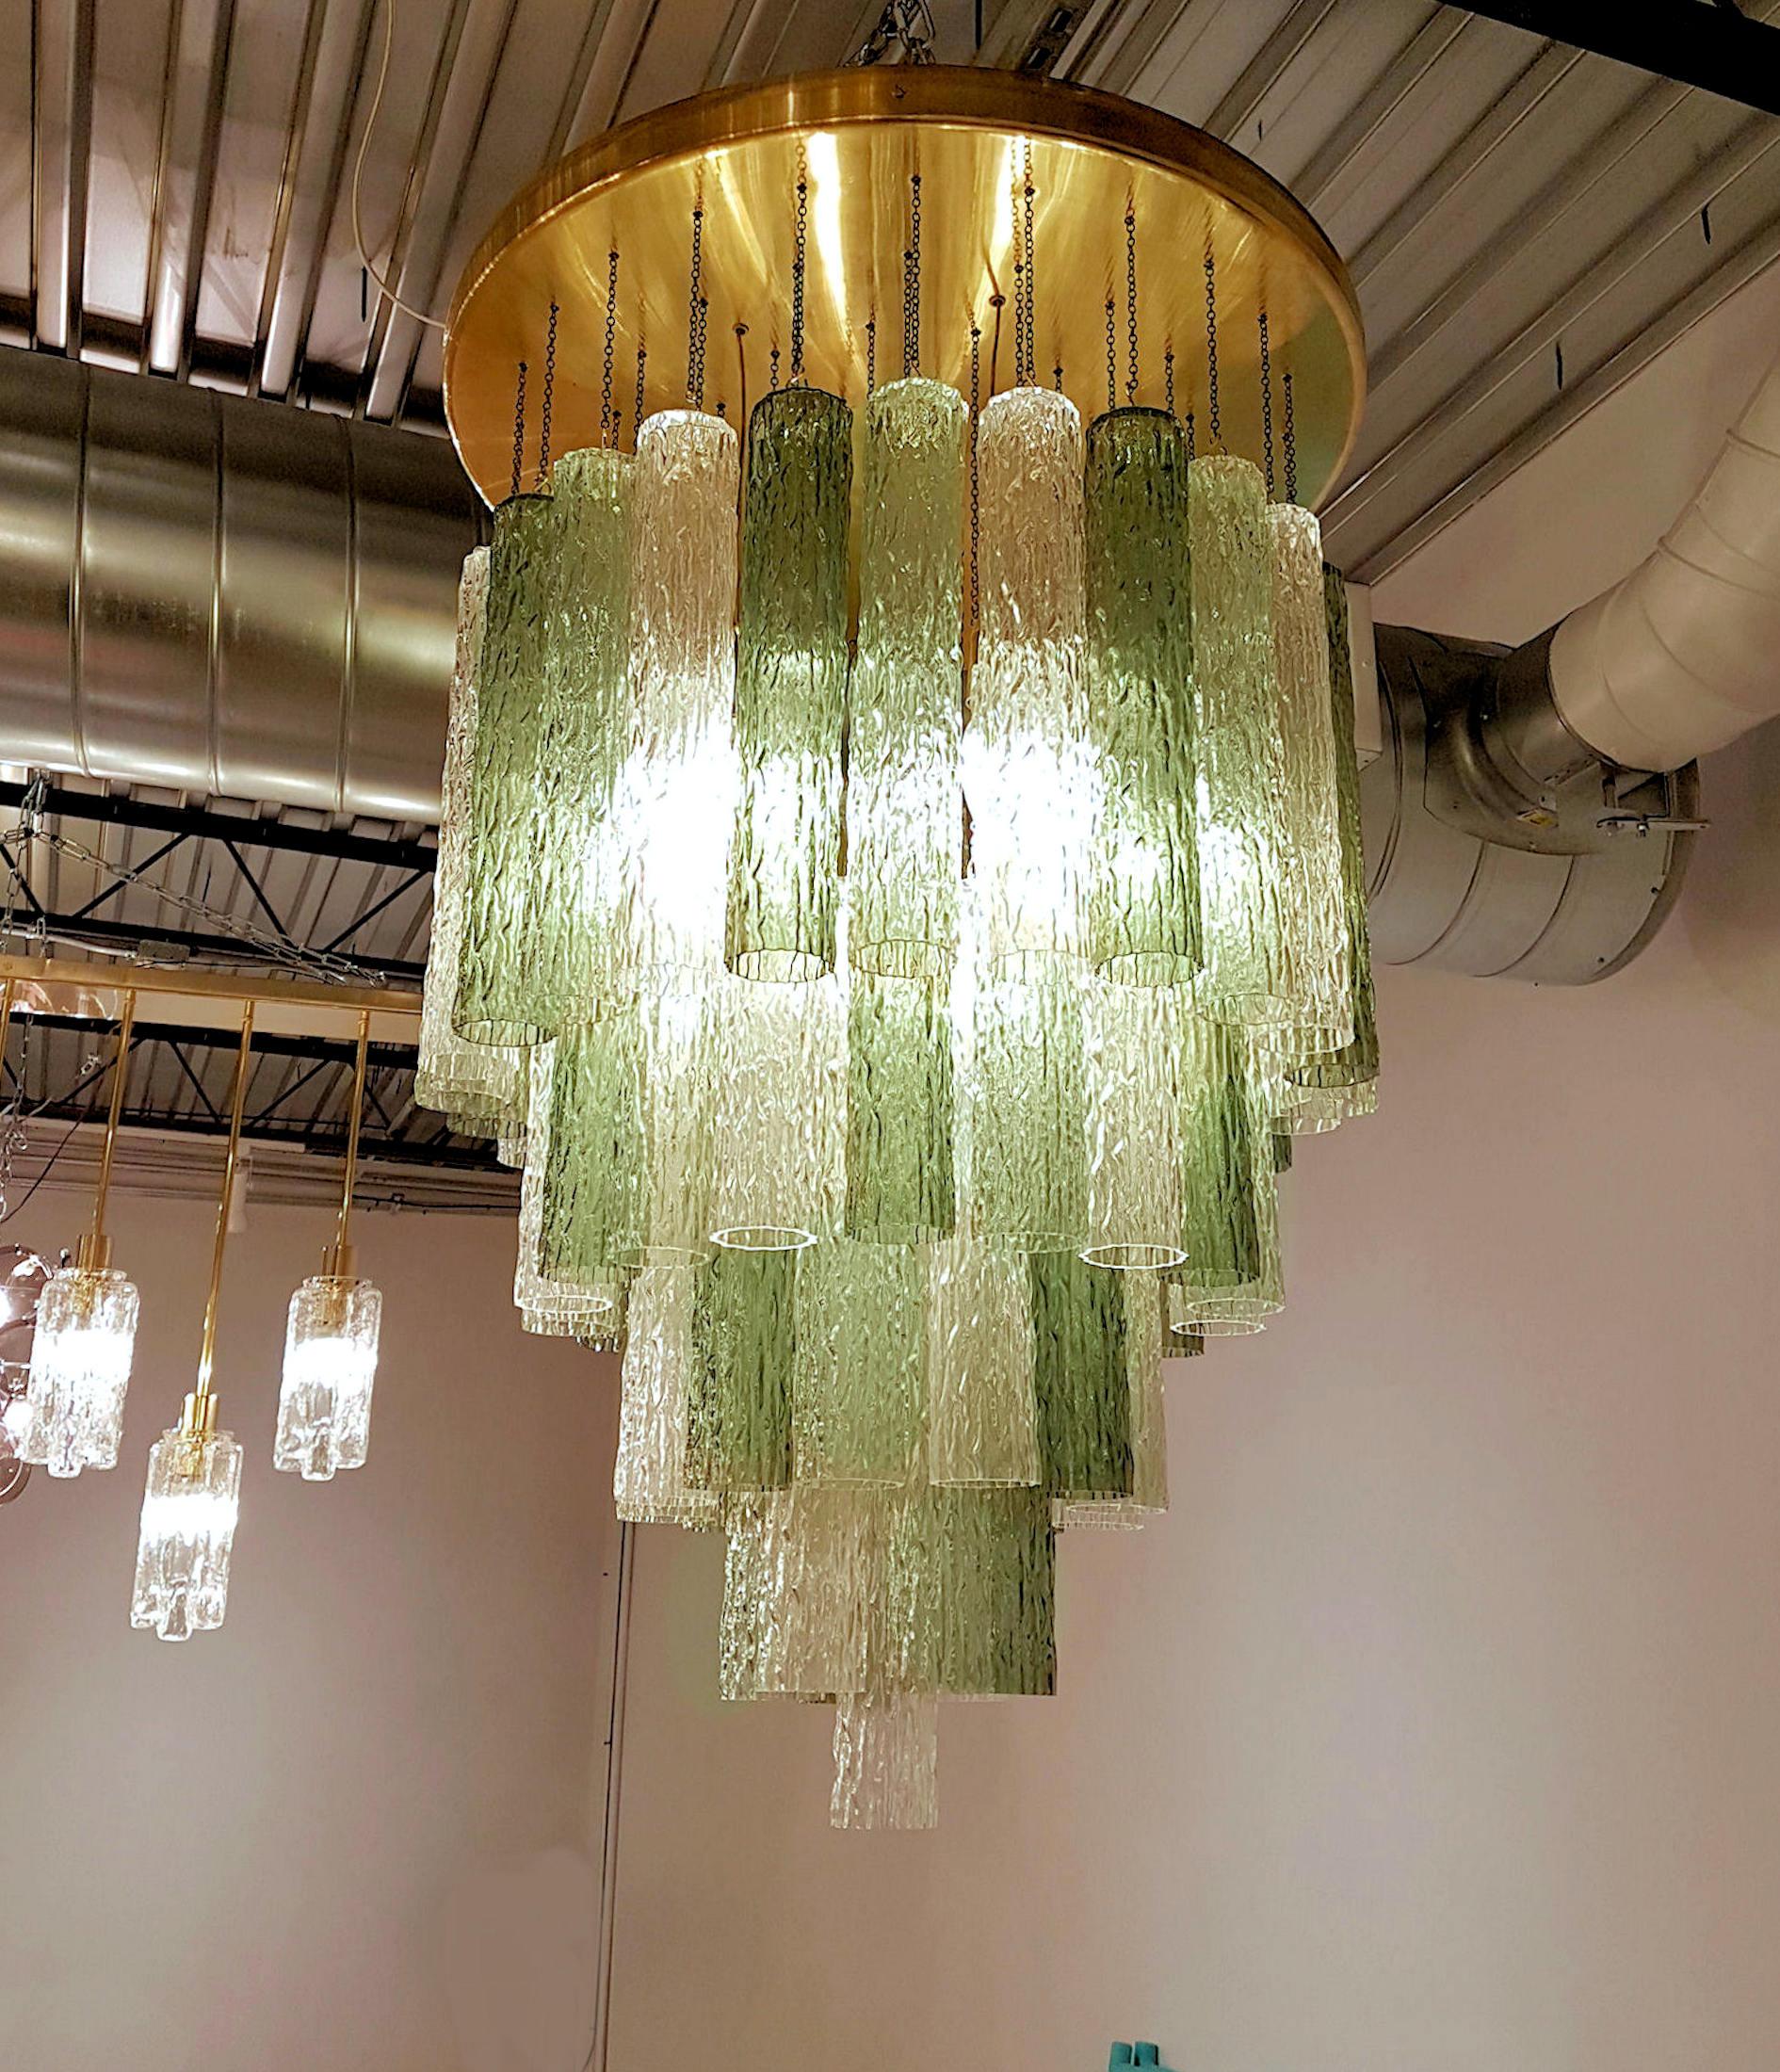 Mid-Century Modern Murano glass and brass flush mount light.
By Venini, Italy, Murano, 1960s-1970s.
3 colors of textured Murano glass tubes: transparent, light green, darker green.
Frame in brass, rewired.
Height may be shorten a little, thanks